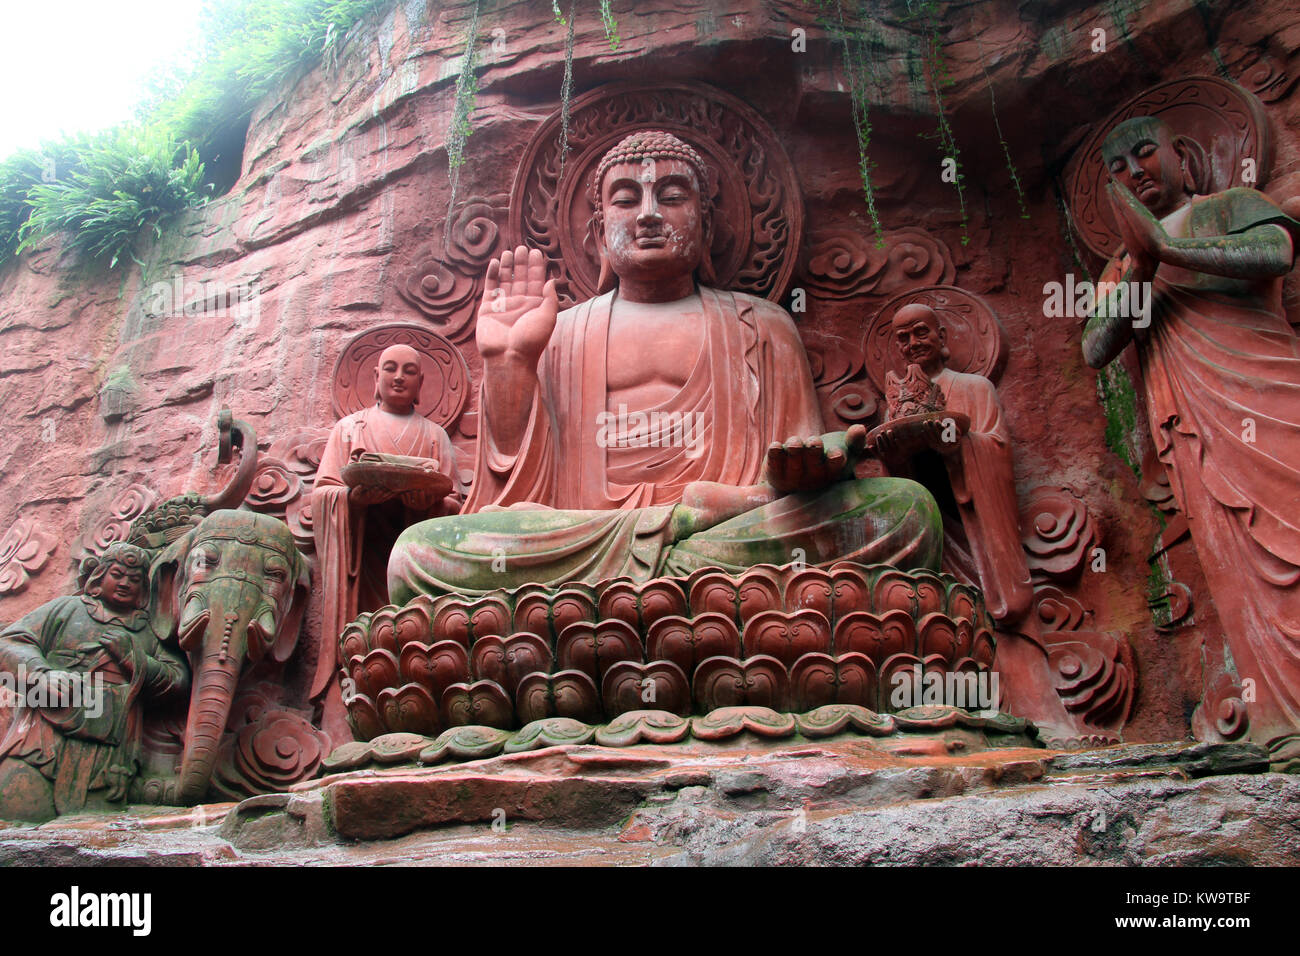 Statues near the wall of rock in EmeiShan, China Stock Photo